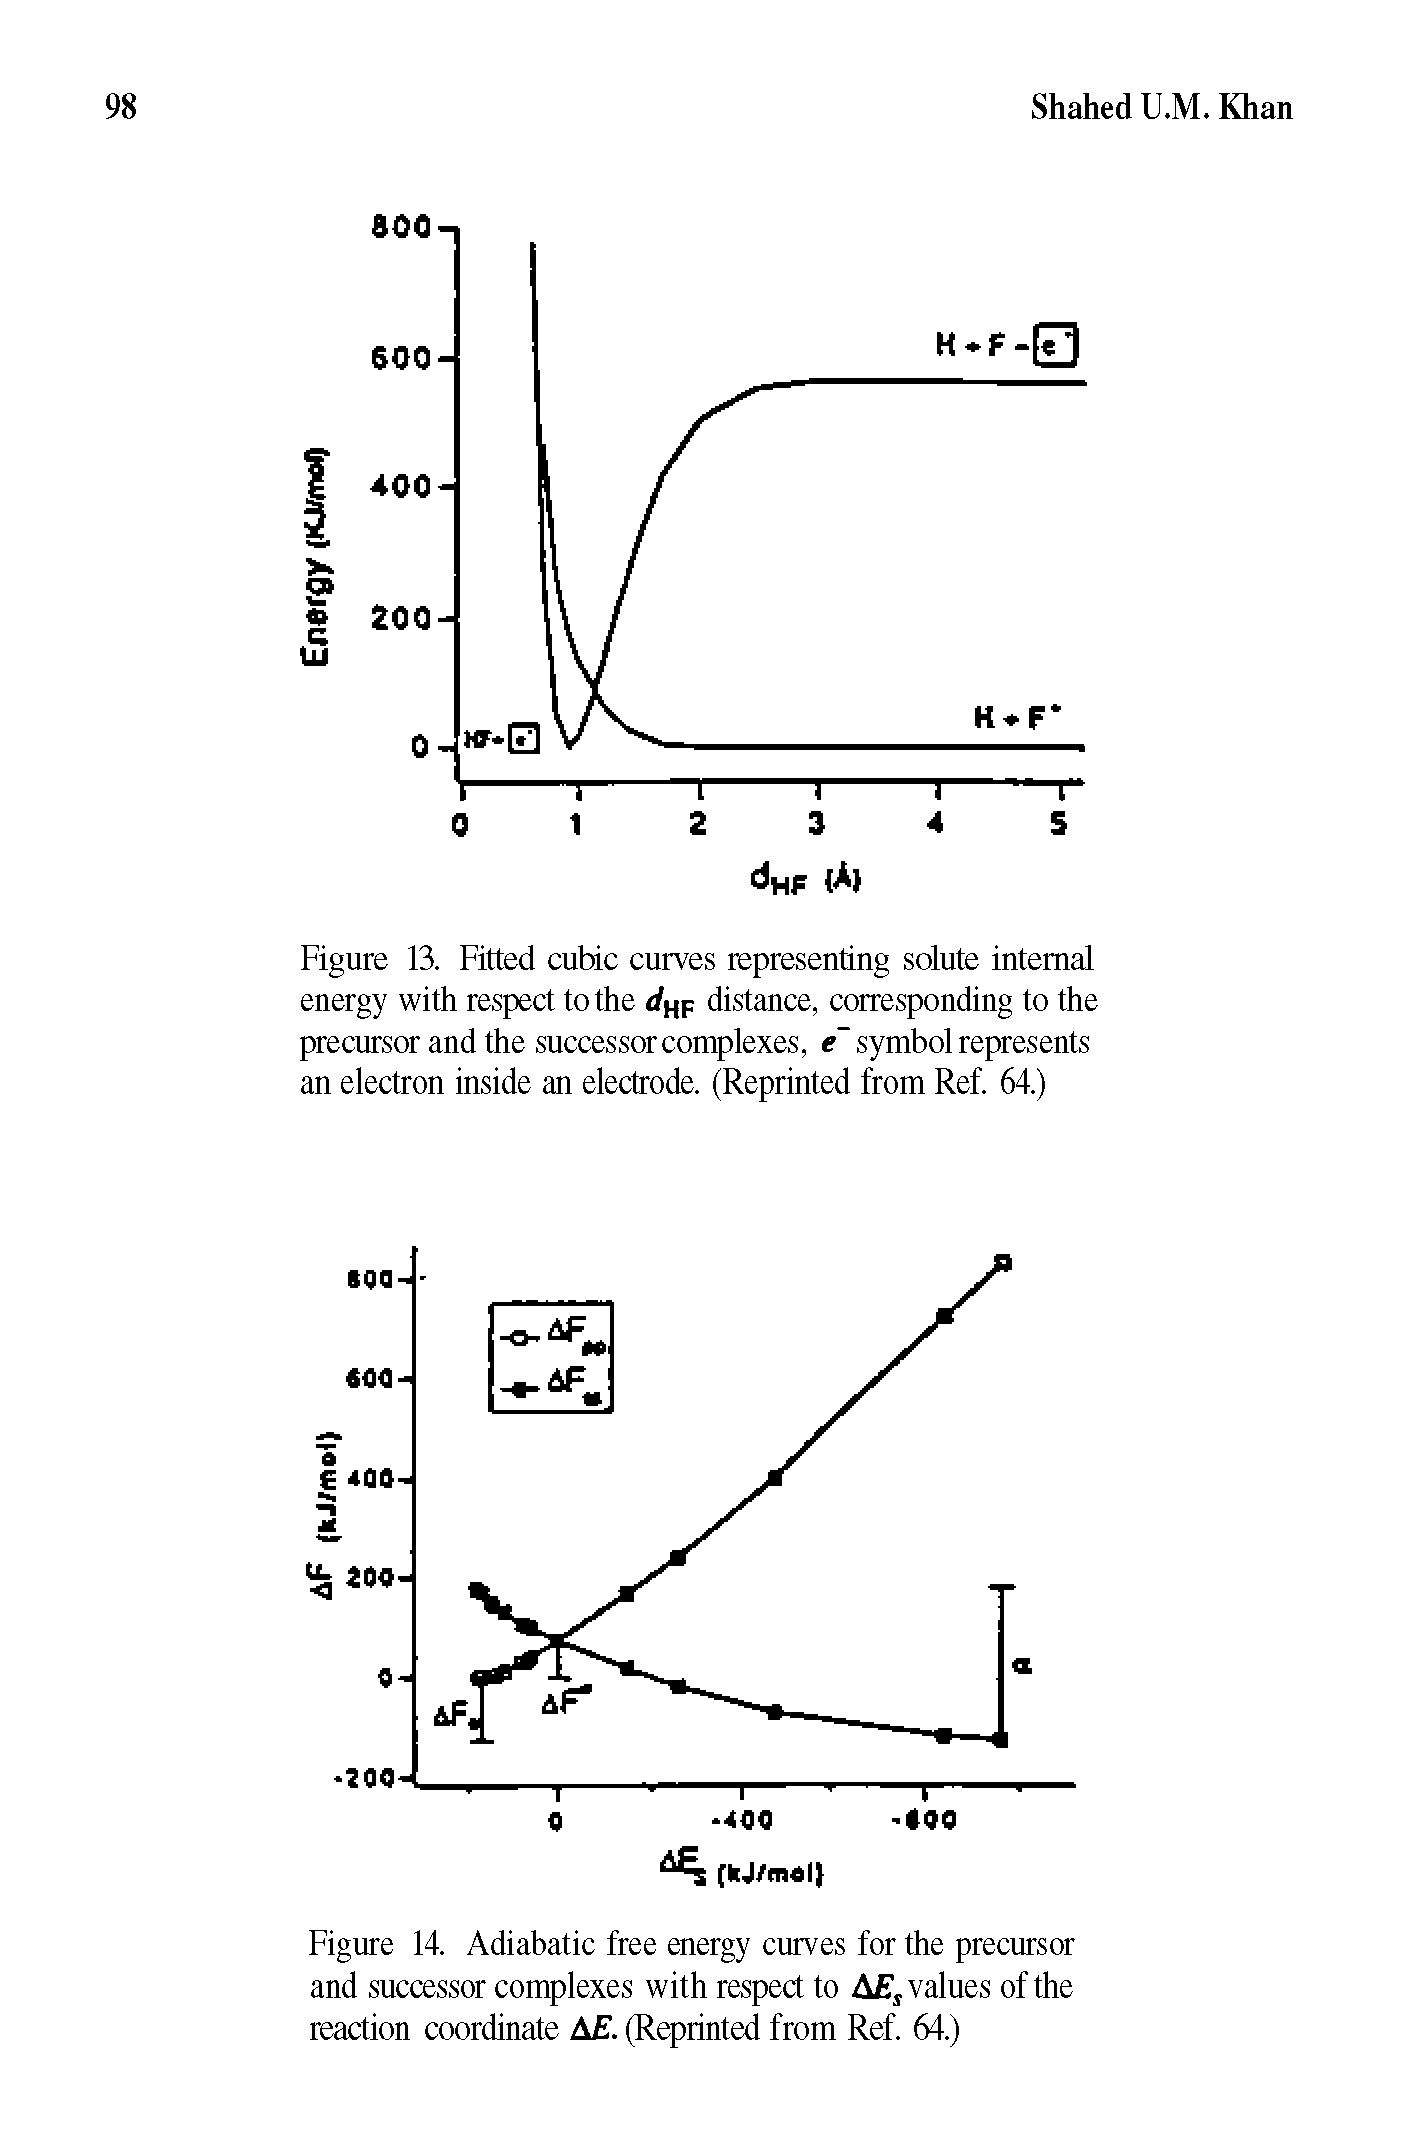 Figure 14. Adiabatic free energy curves for the precursor and successor complexes with respect to A j values of the reaction coordinate A . (Reprinted from Ref 64.)...